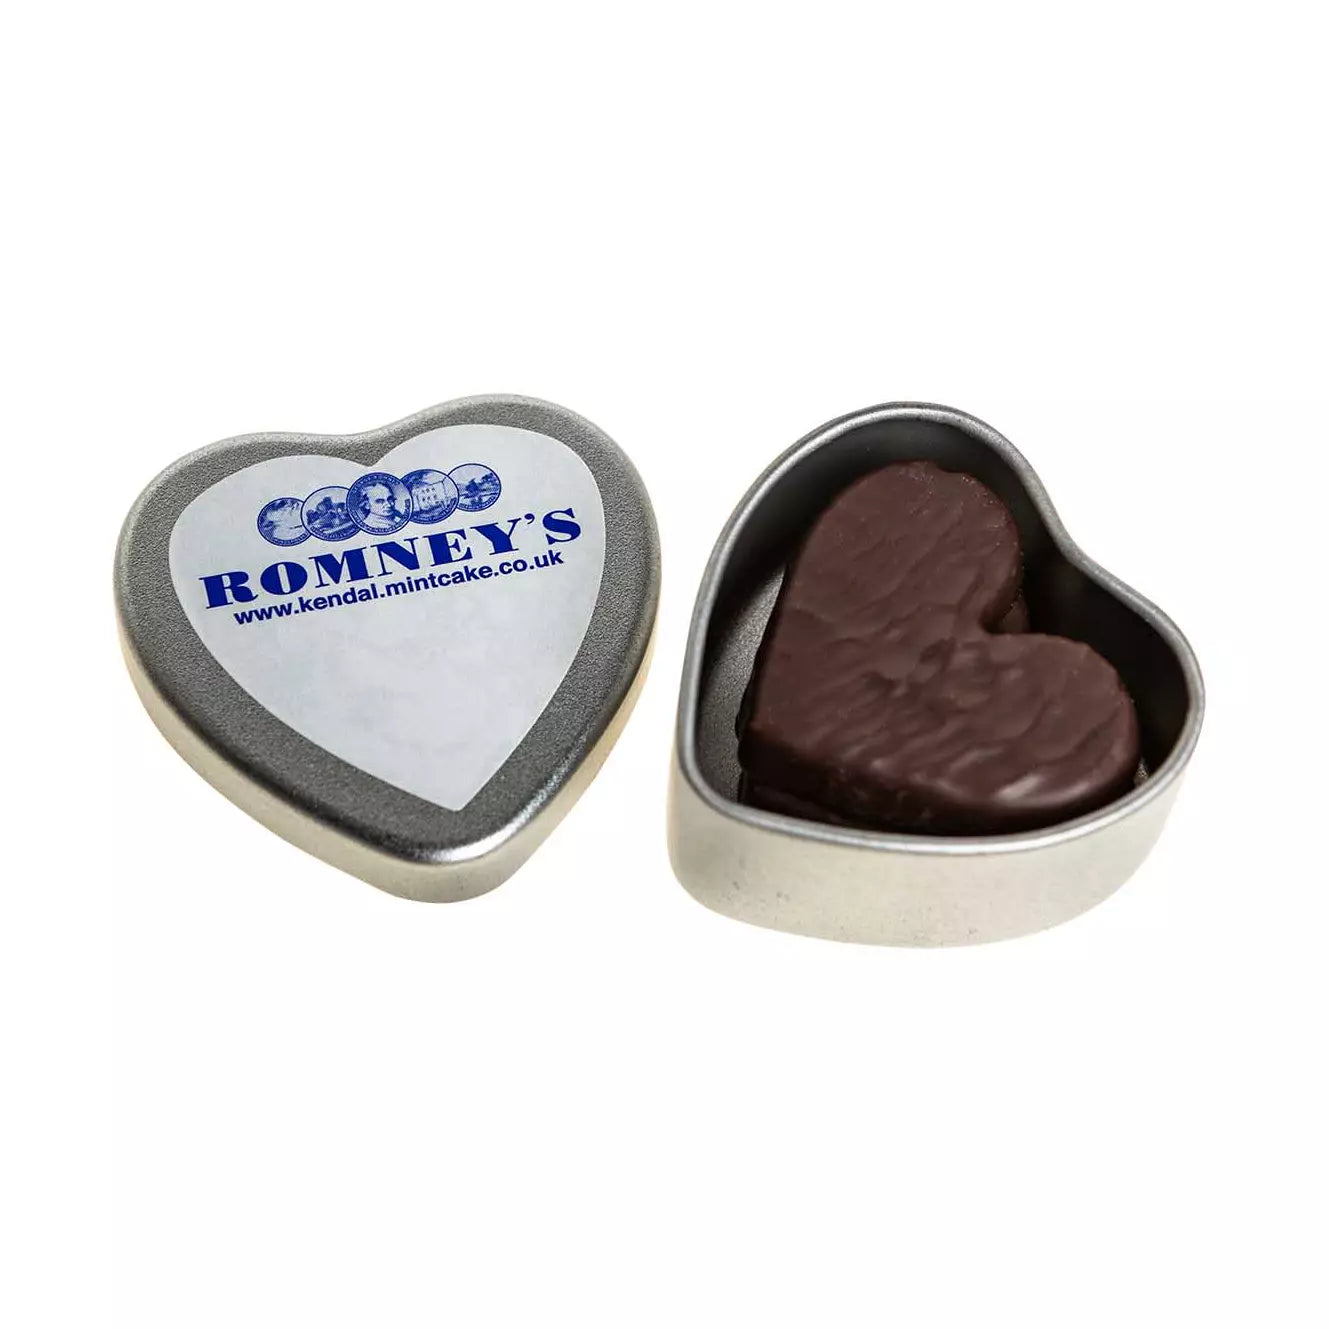 Chocolate Covered Kendal Mint Cake Hearts Tin